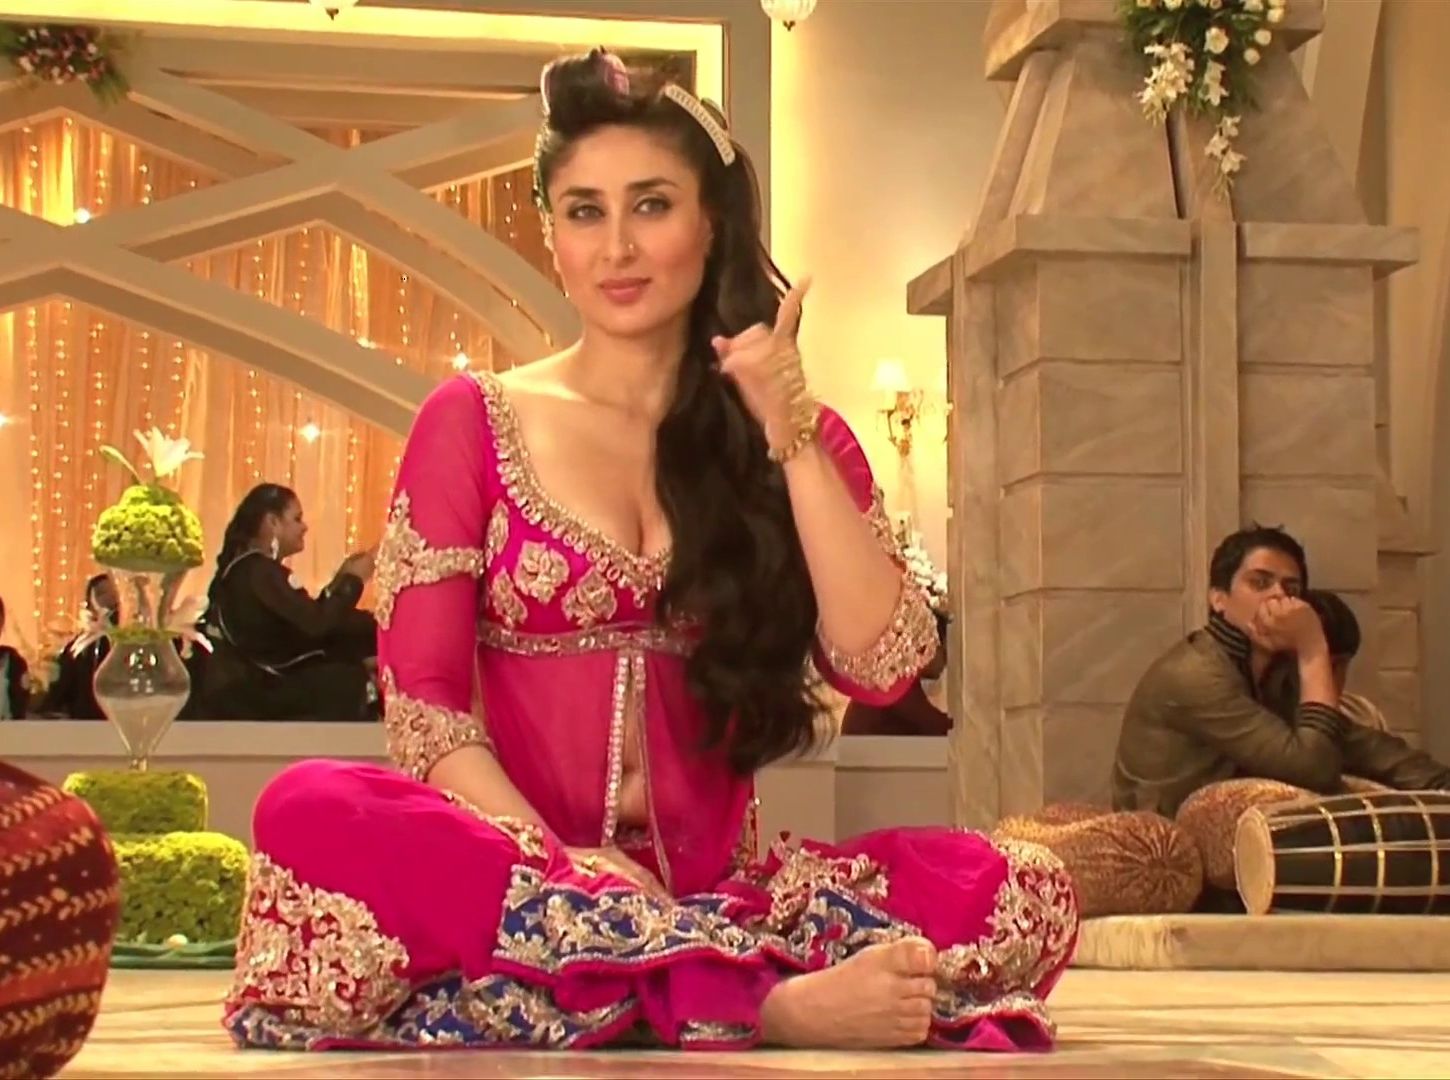 High Quality Bollywood Celebrity Pictures Kareena Kapoor Flaunts Deep Cleavage For The Mujra